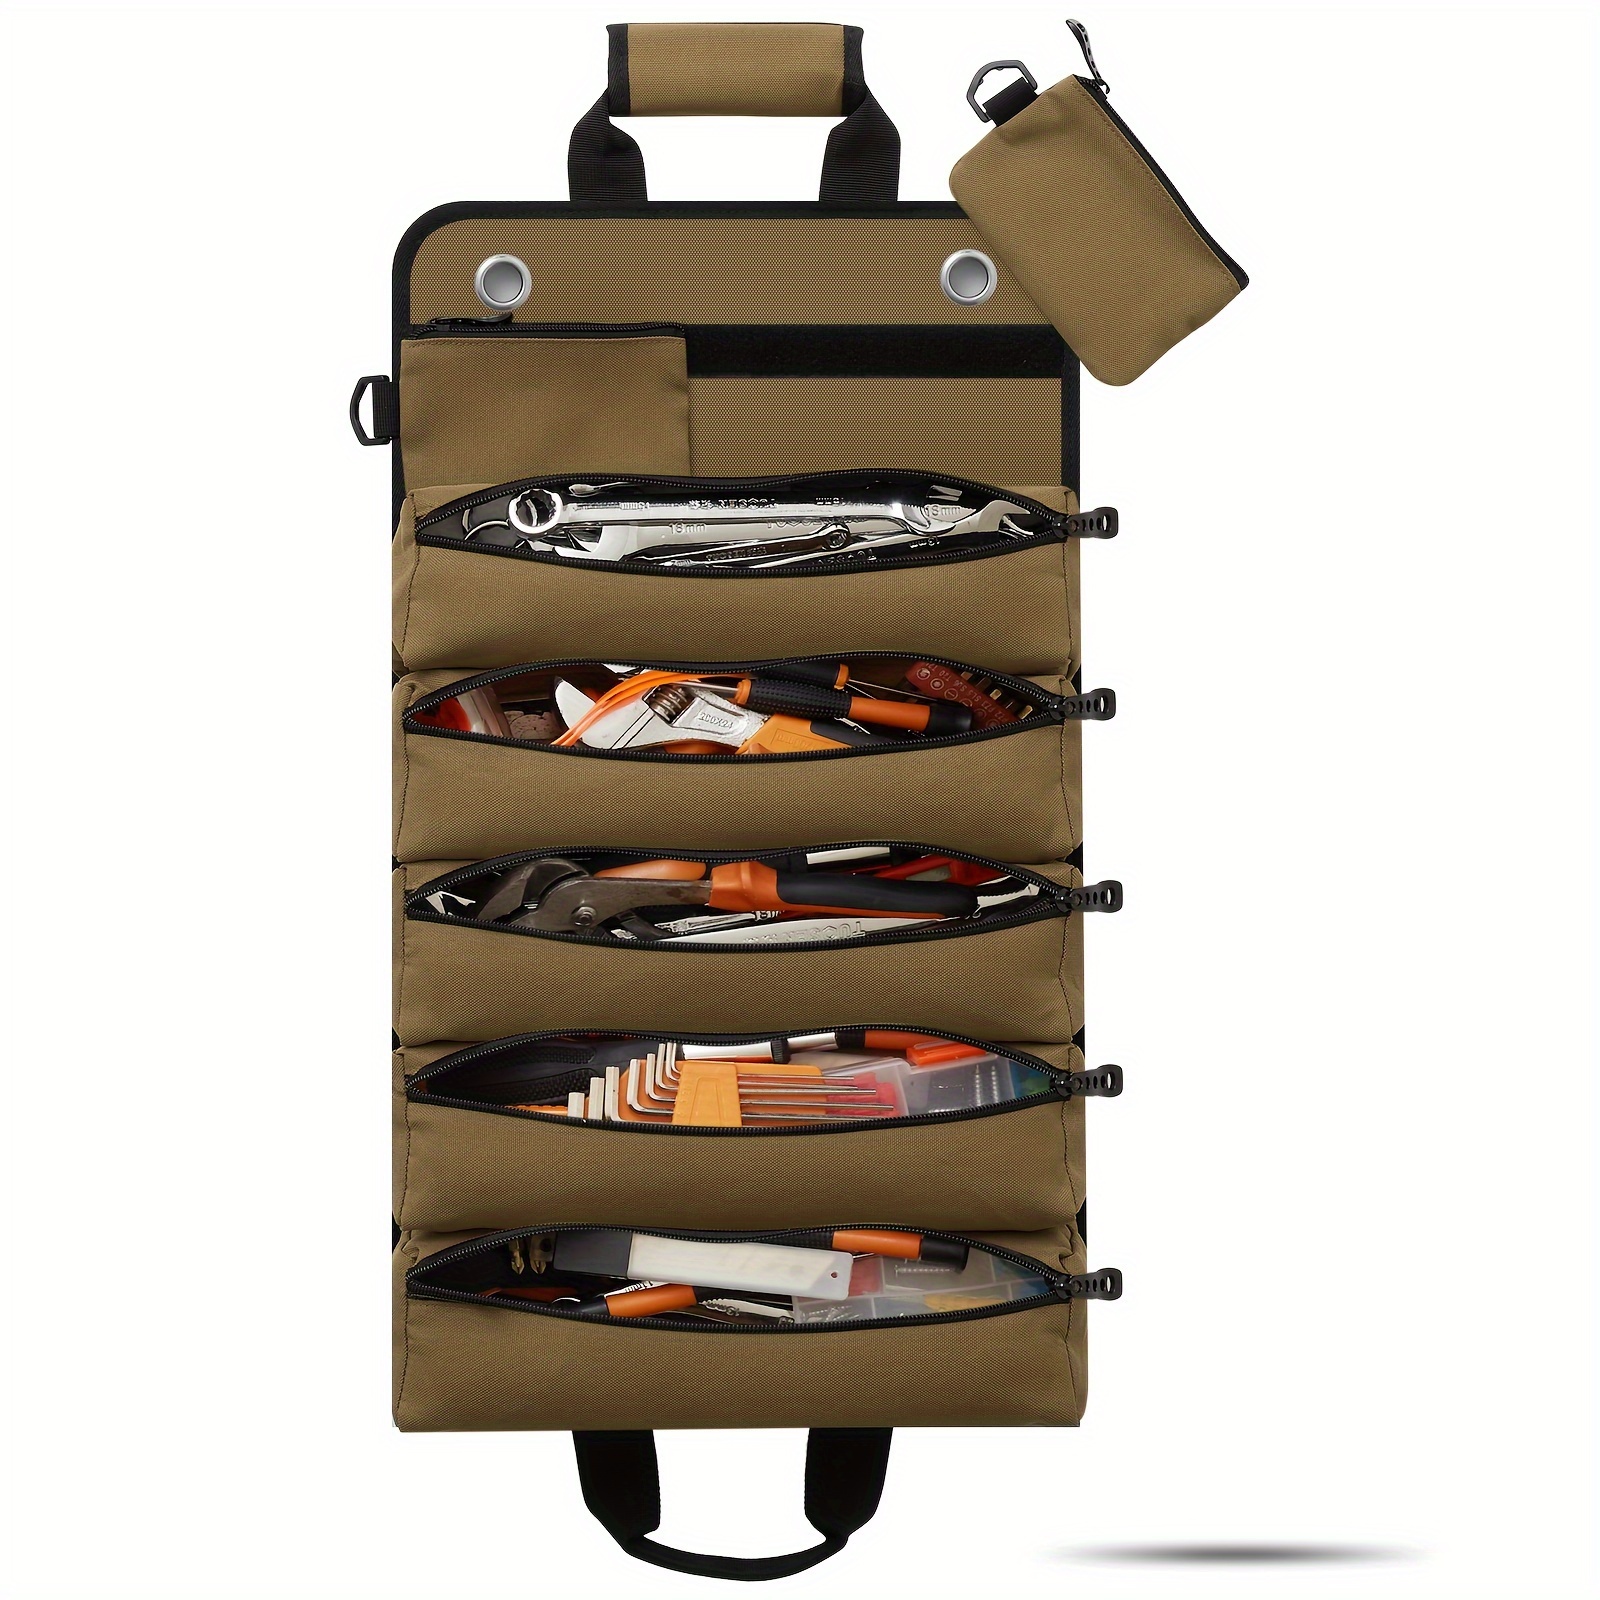 Repair Tool Bag, Heavy Duty Roll Up Tool Bag Organiser; Gift For Dad, Tool Roll Organiser For Electricians And Maintenance Worker Hobbyist